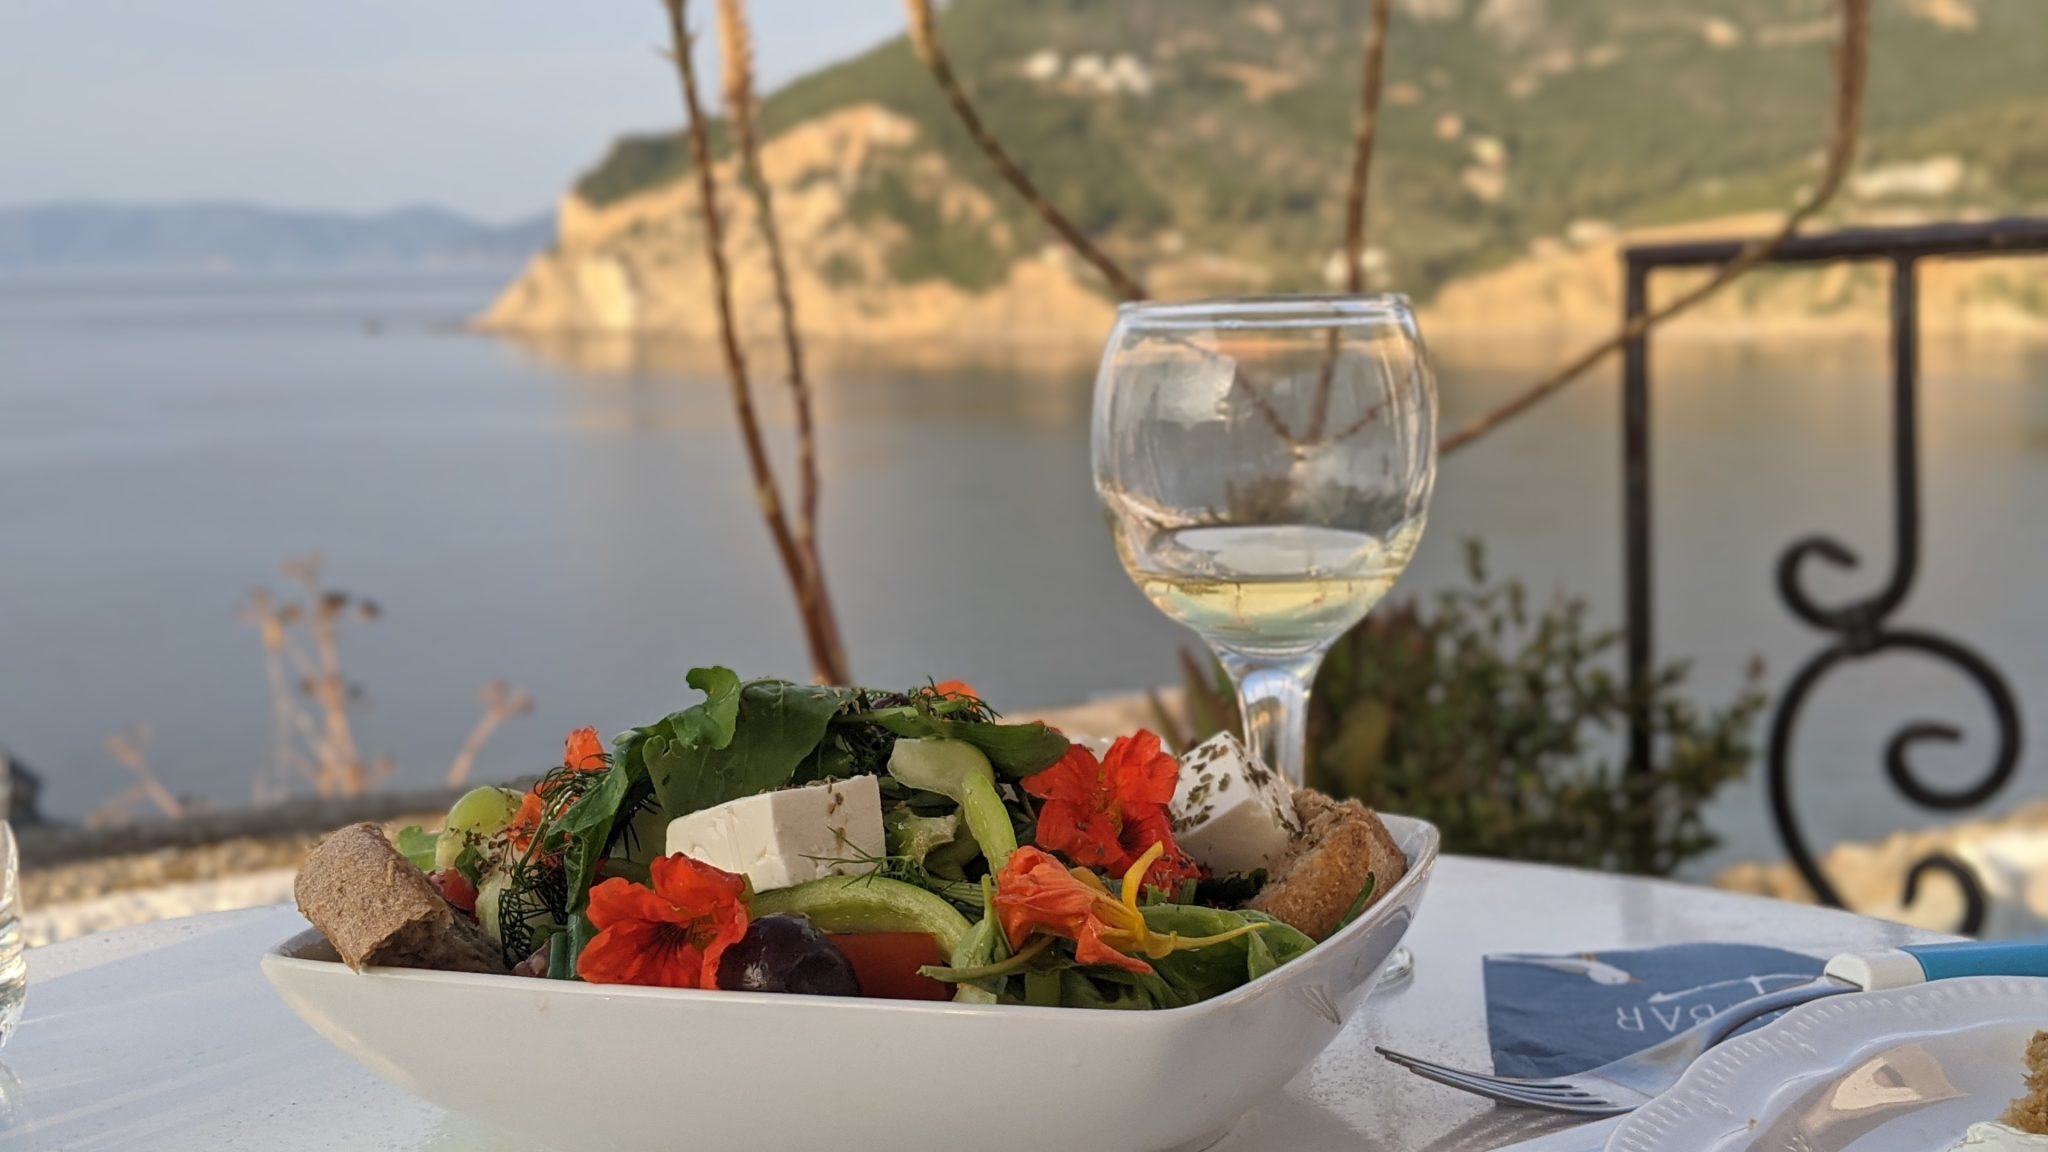 Greek Salad and White Wine with a View